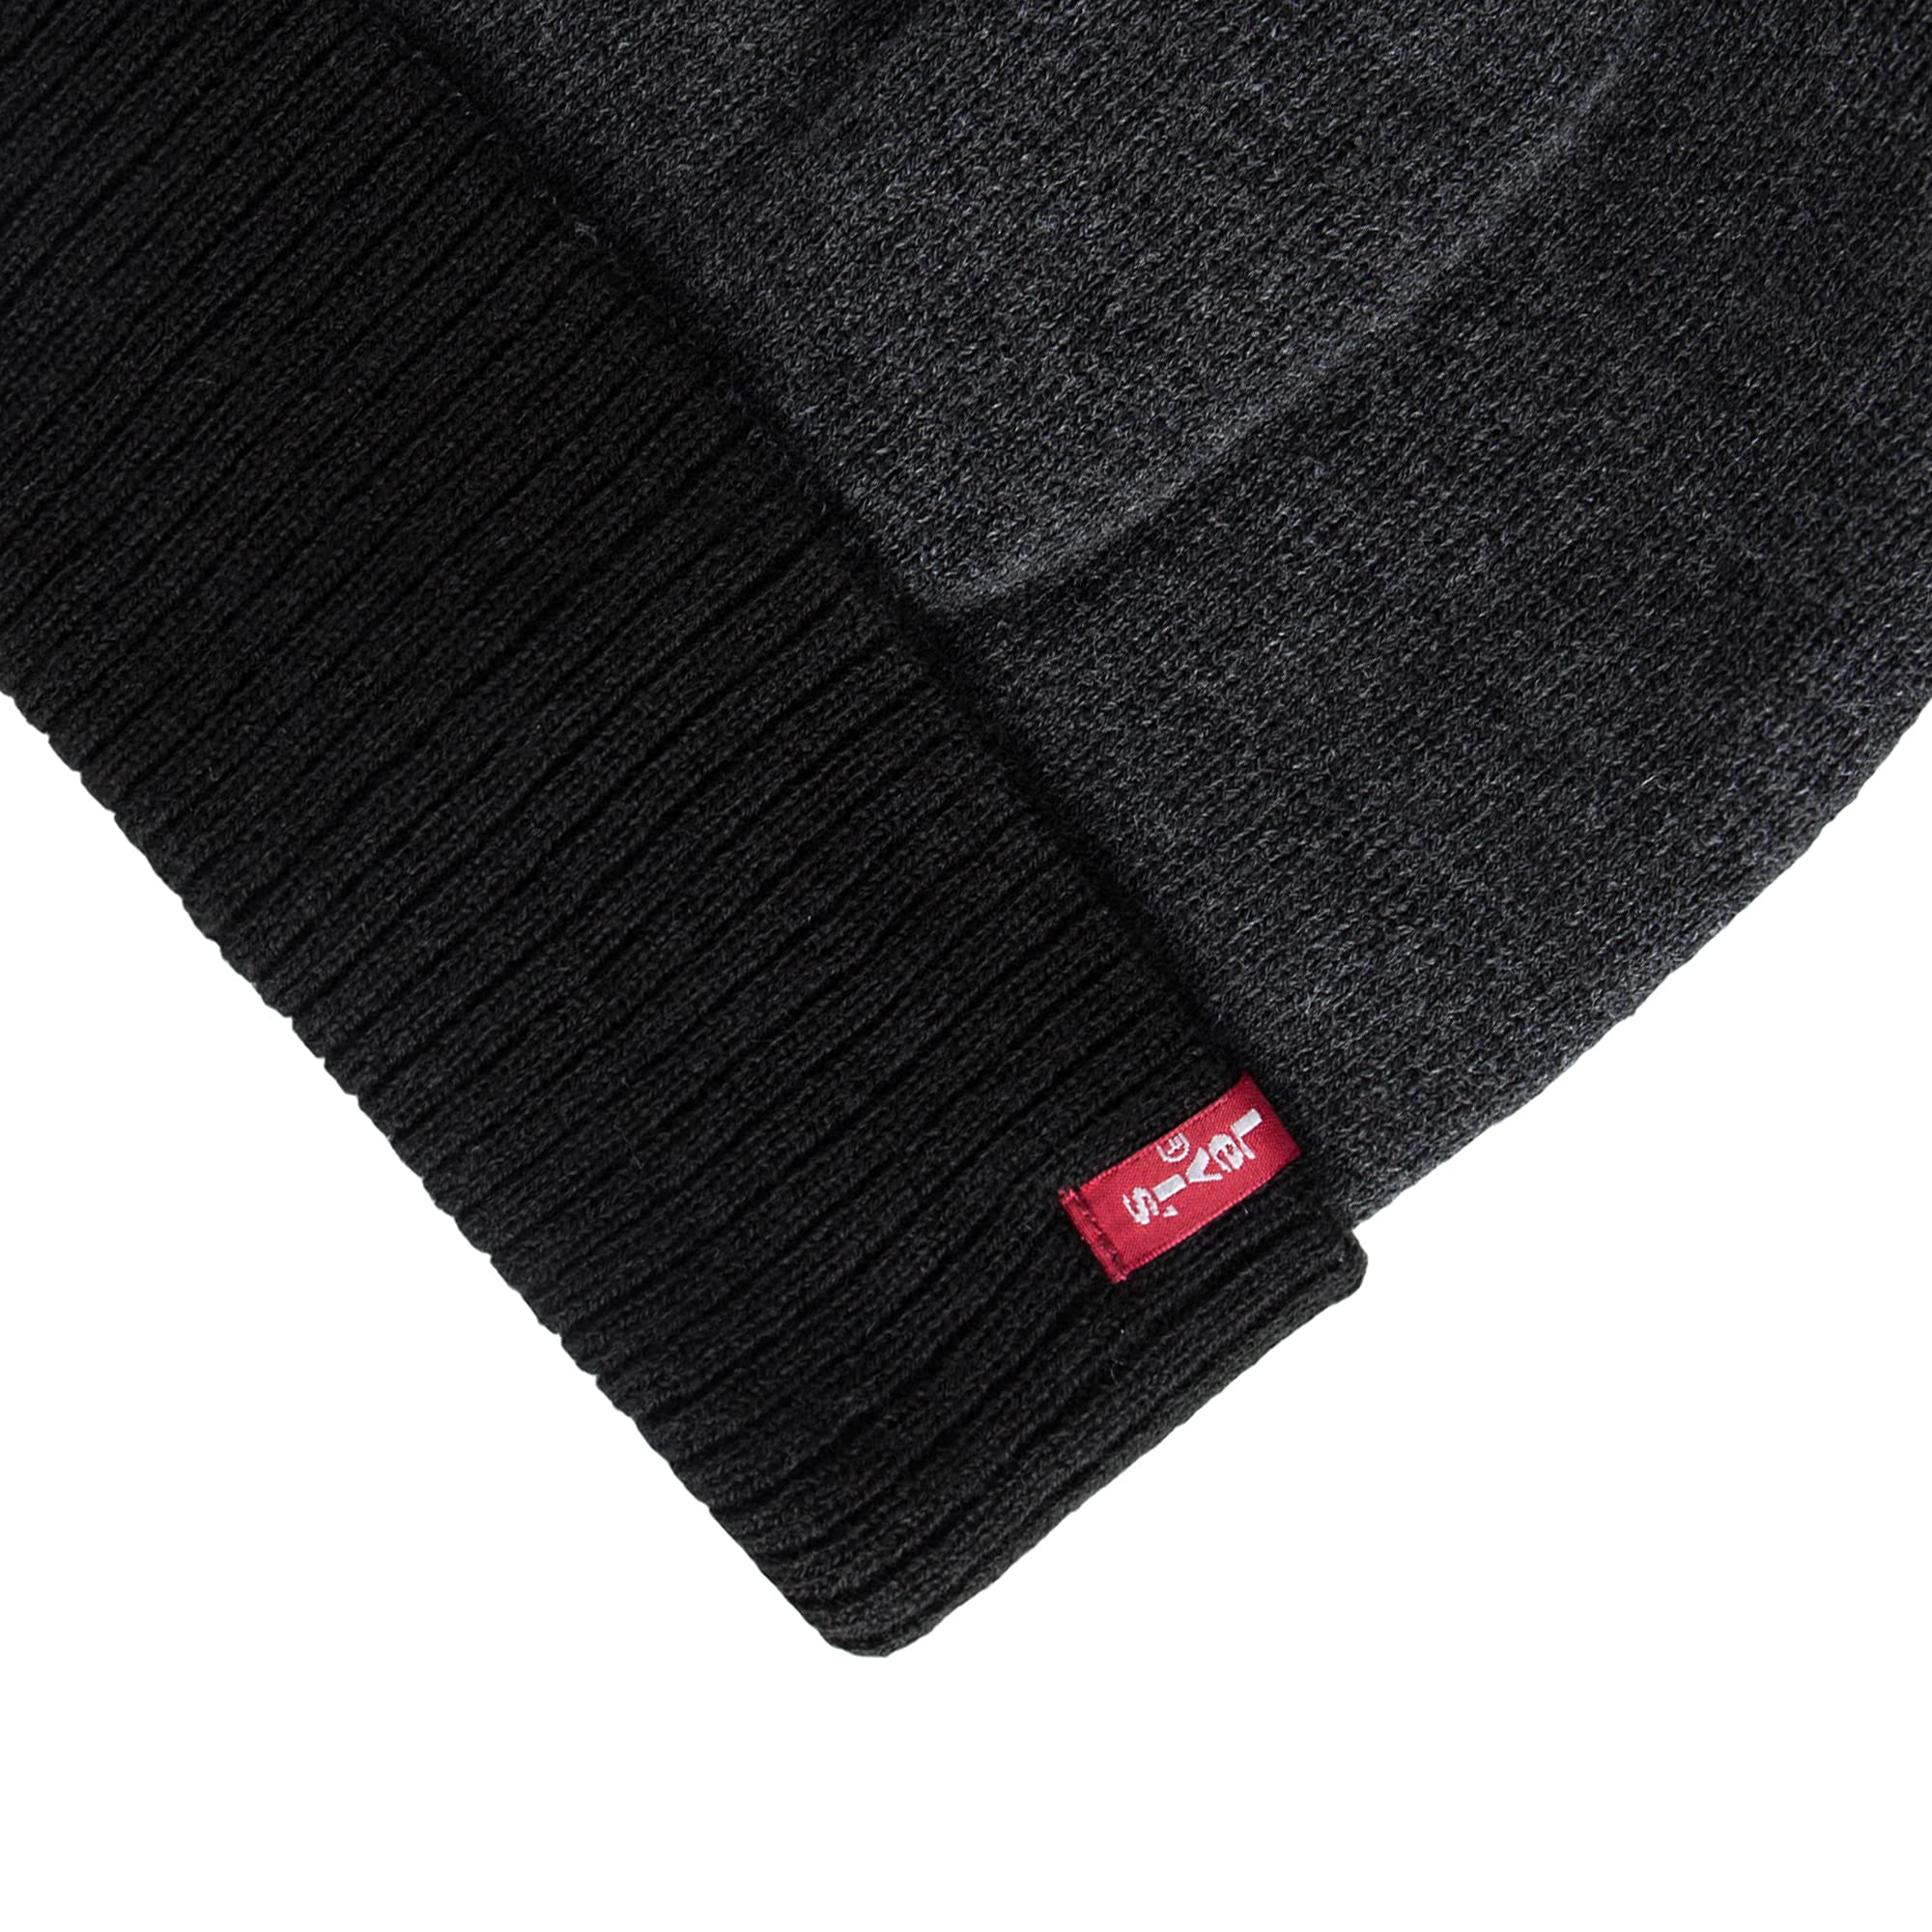 Levi's Men's Reversible Beanie with Fingerless Gloves Set, Charcoal/Black, One Size